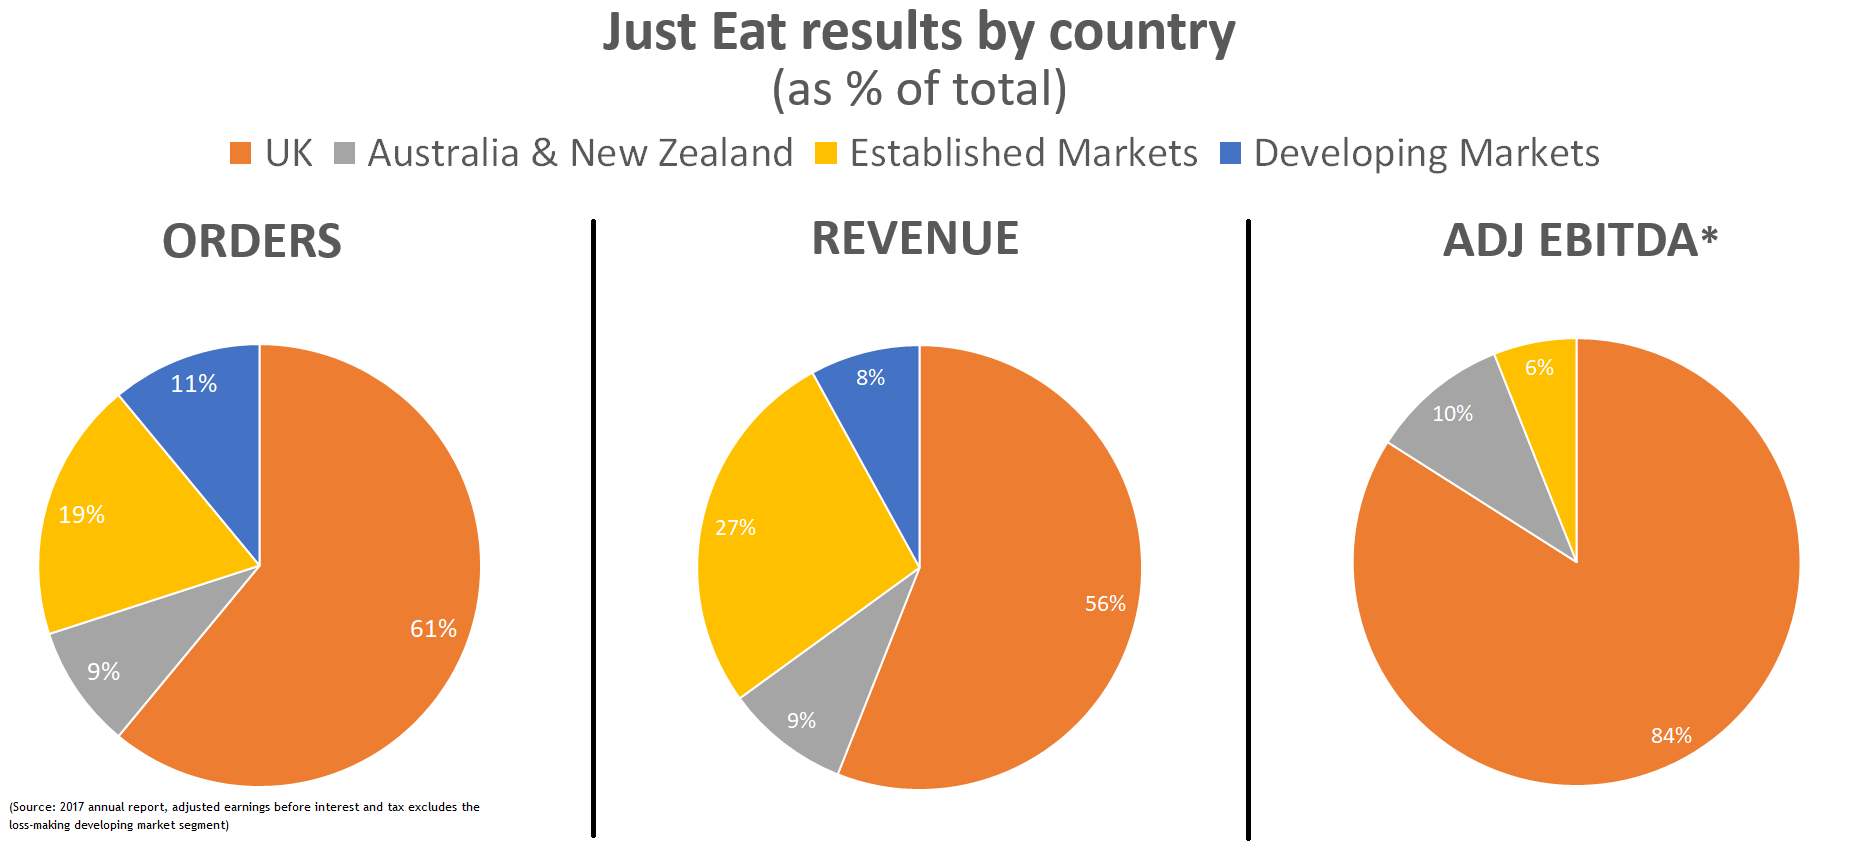 Just Eat results by country